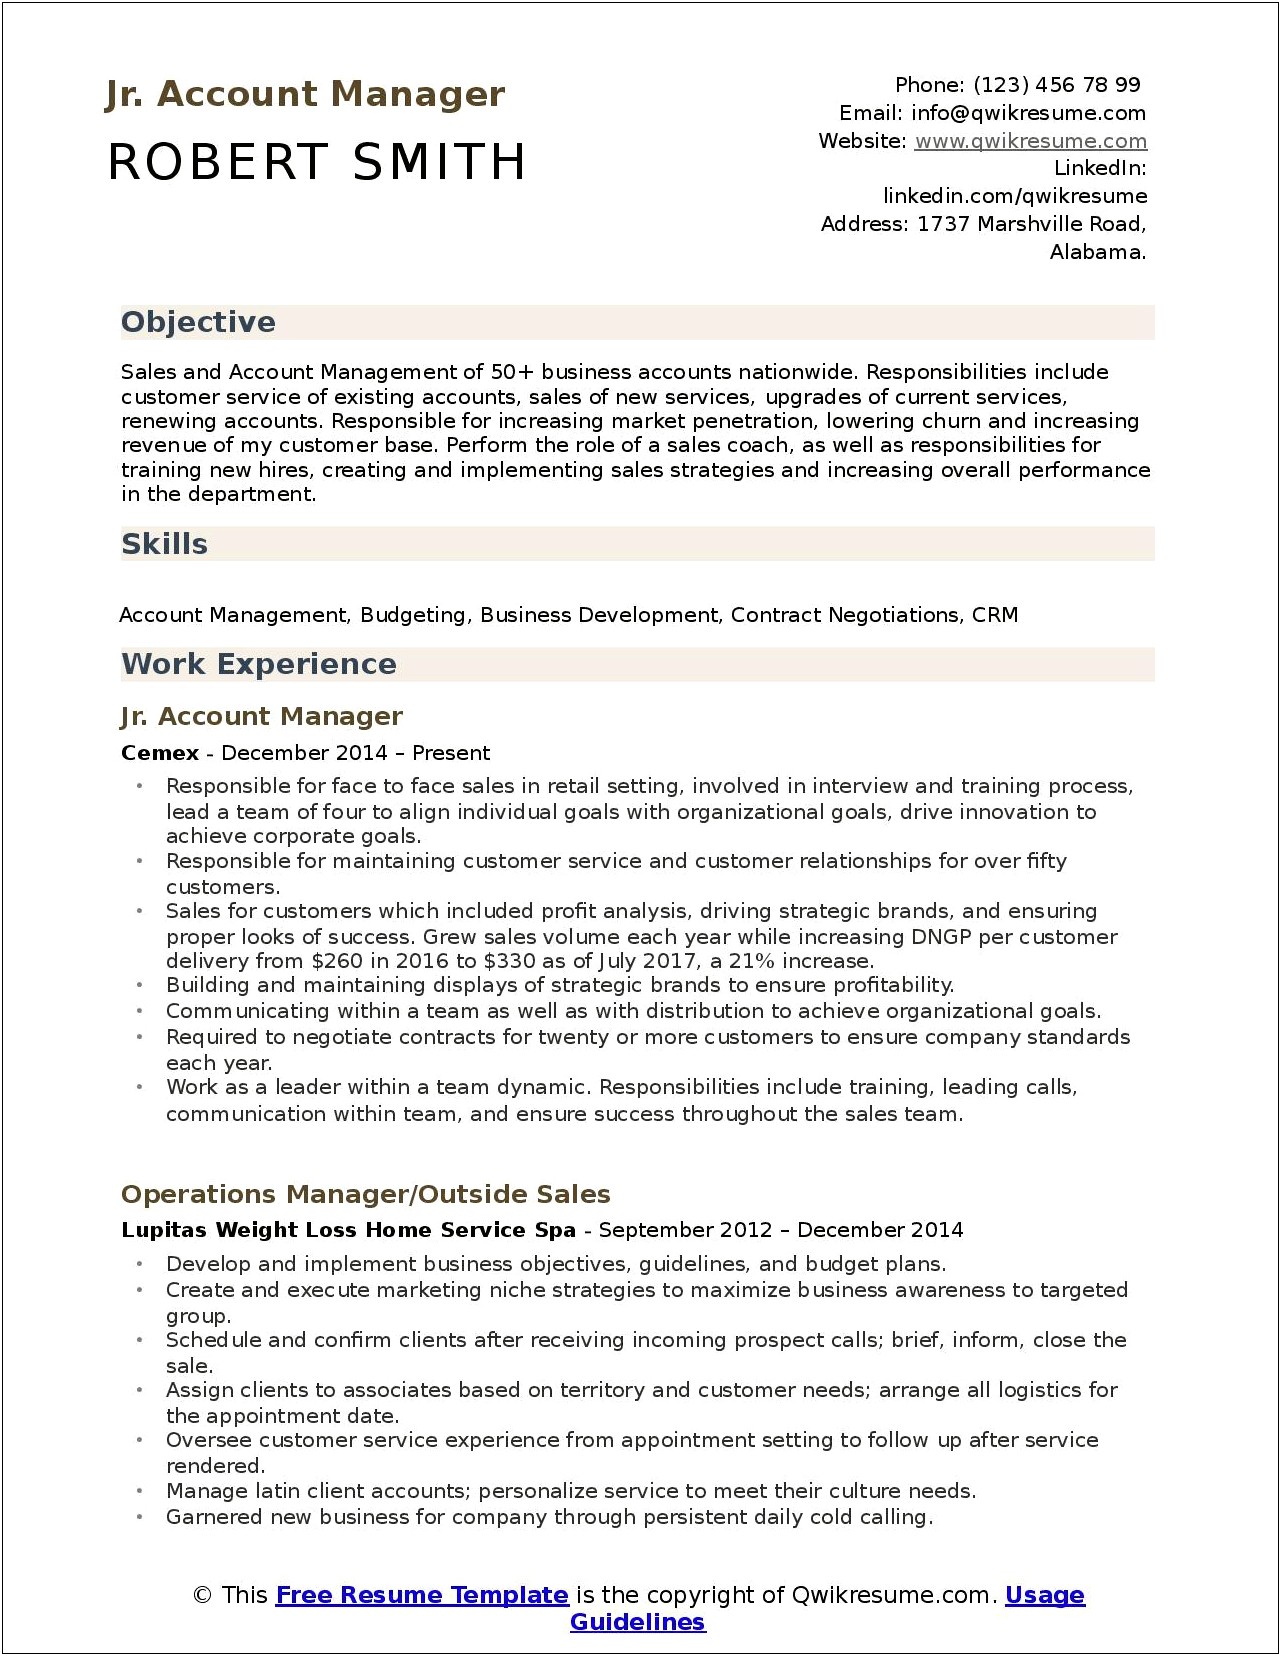 Customer Service Manager Resume Samples Free